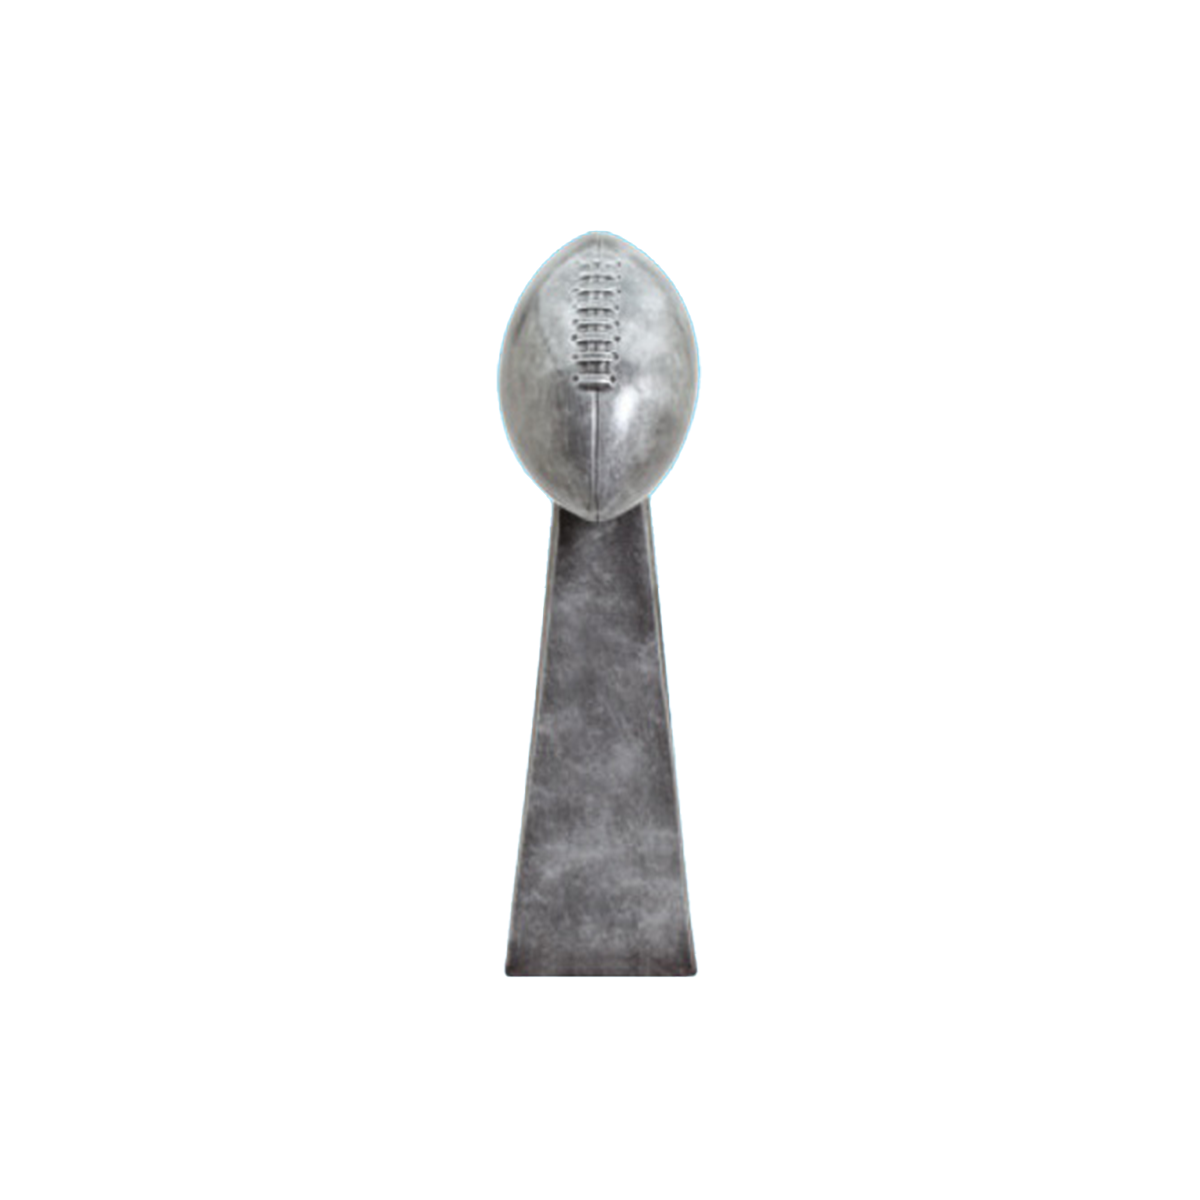 Football Tower Trophy in Antique Finish